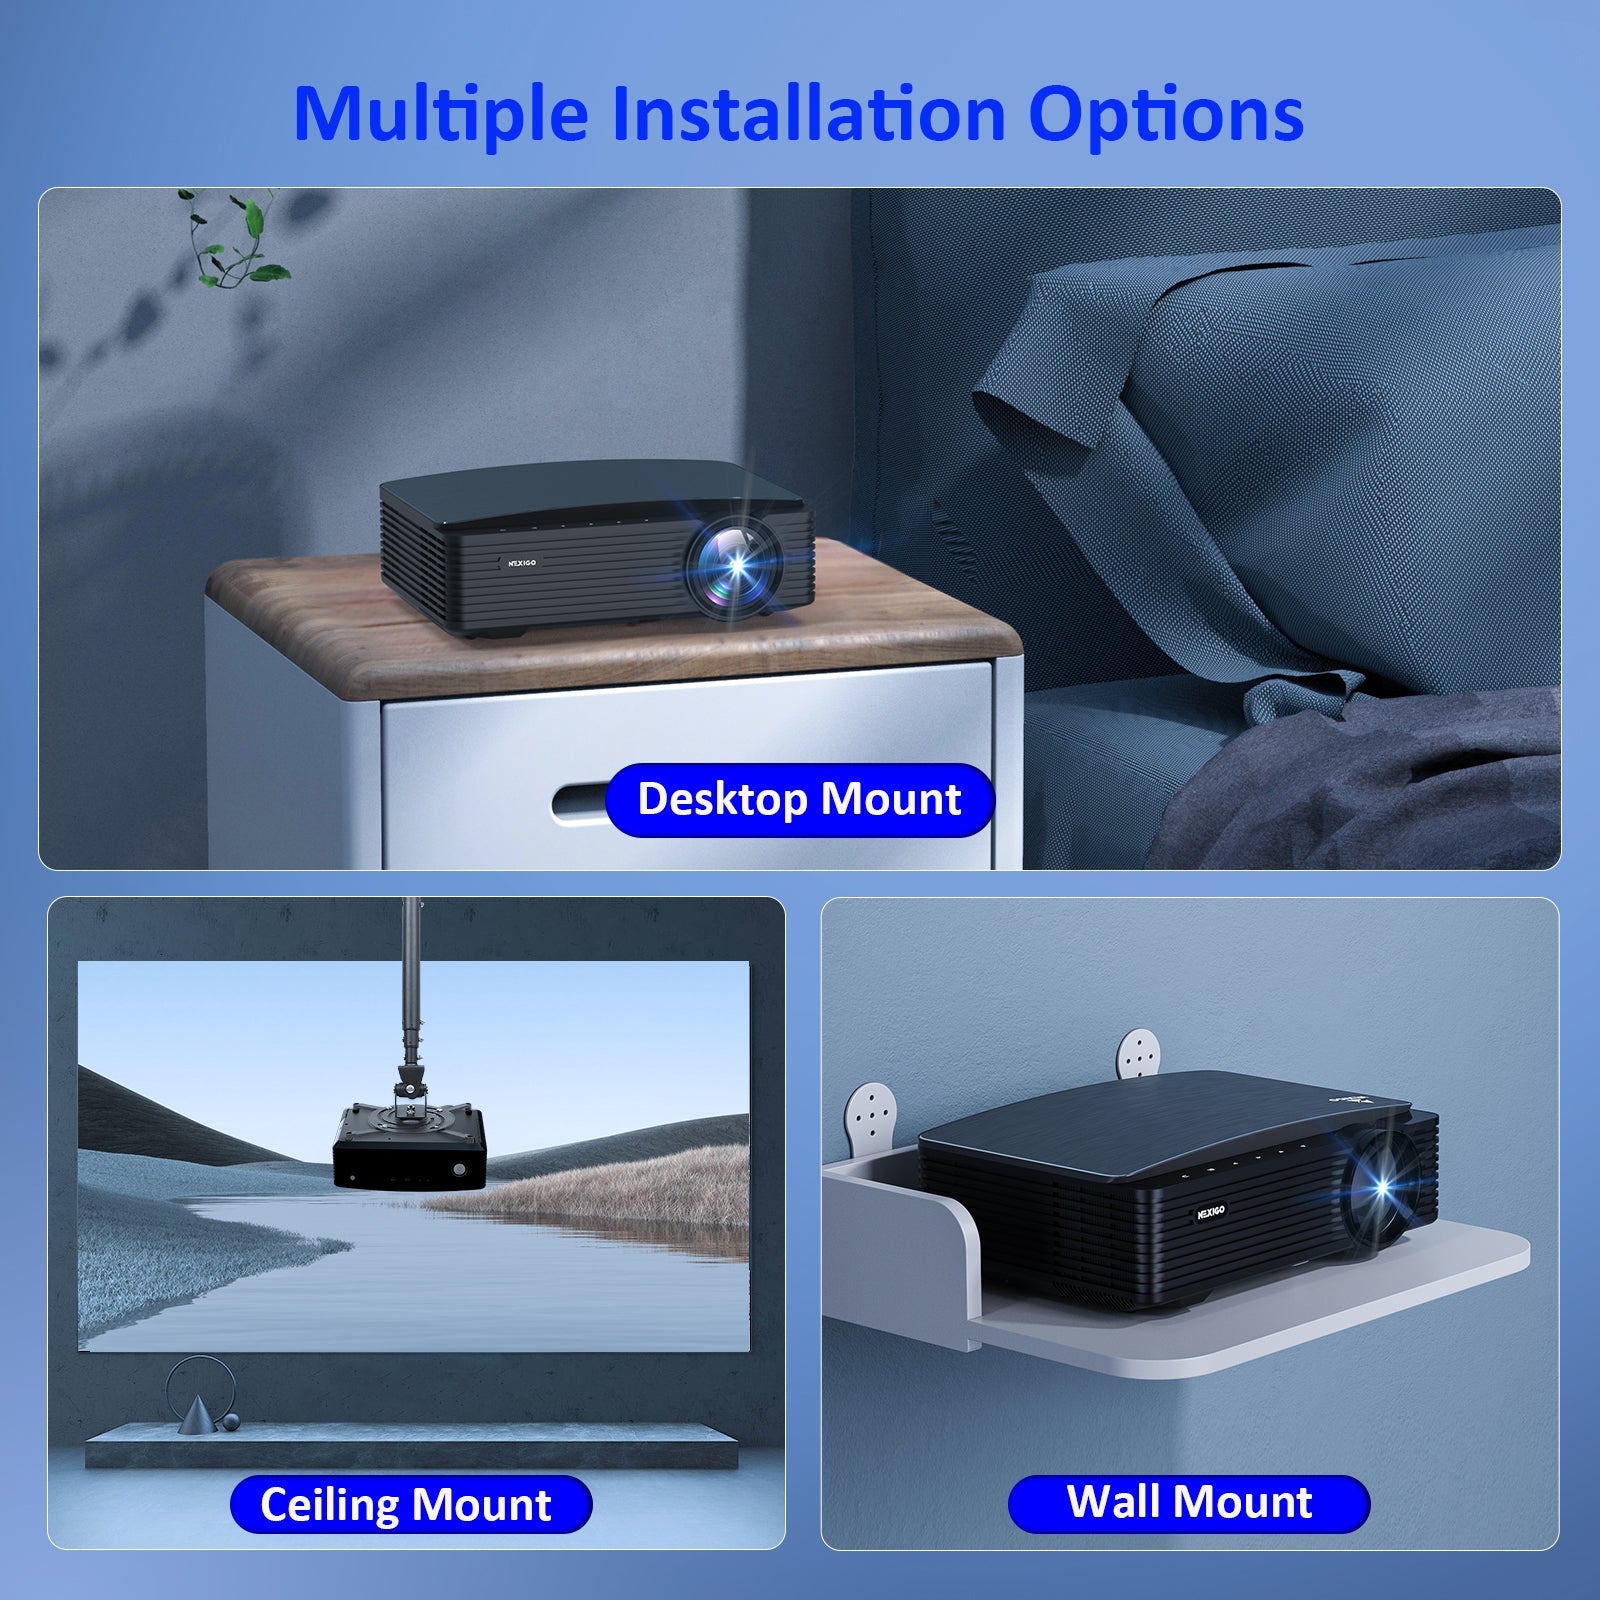 Multiple installation options are available, including desktop, ceiling, and wall mounting.